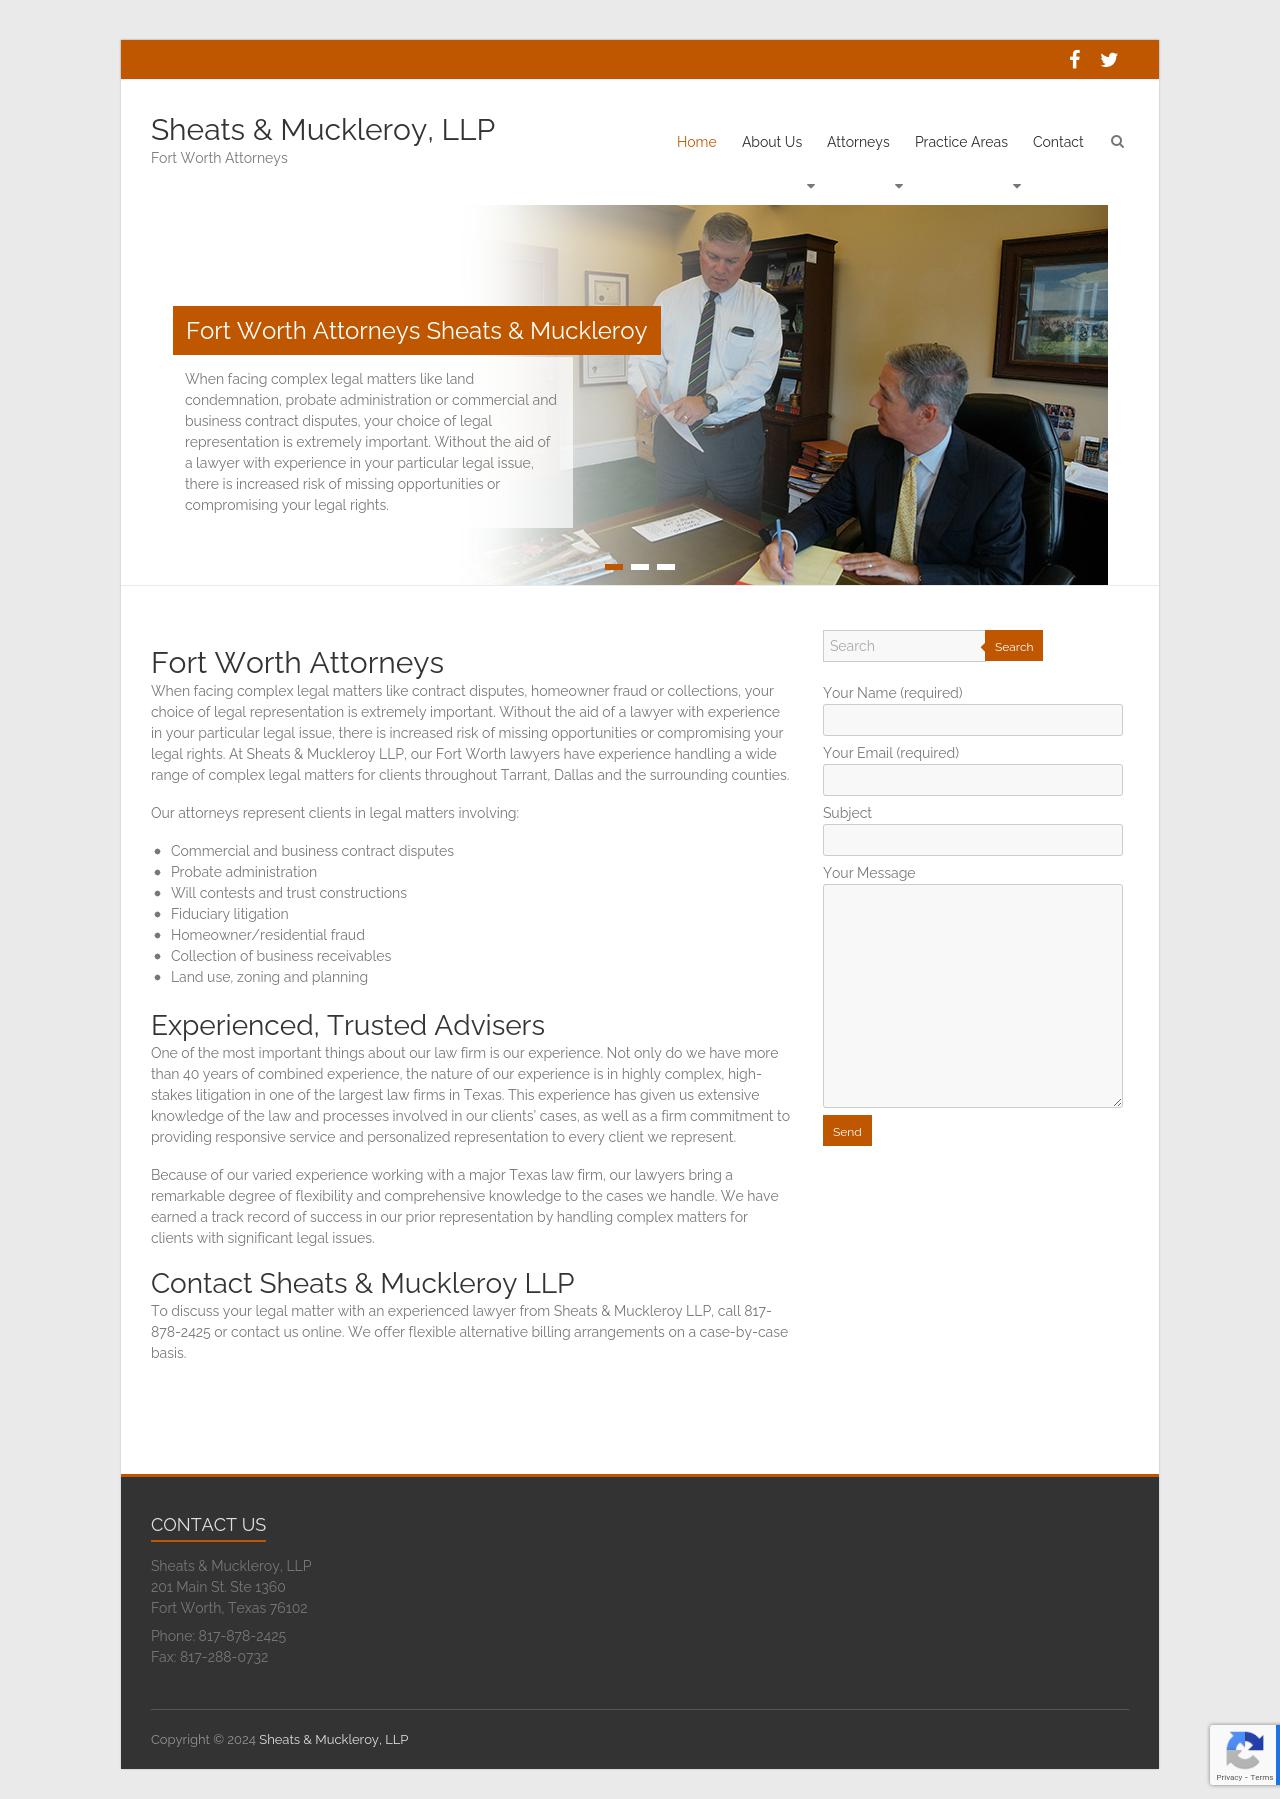 Sheats & Muckleroy LLP - Fort Worth TX Lawyers